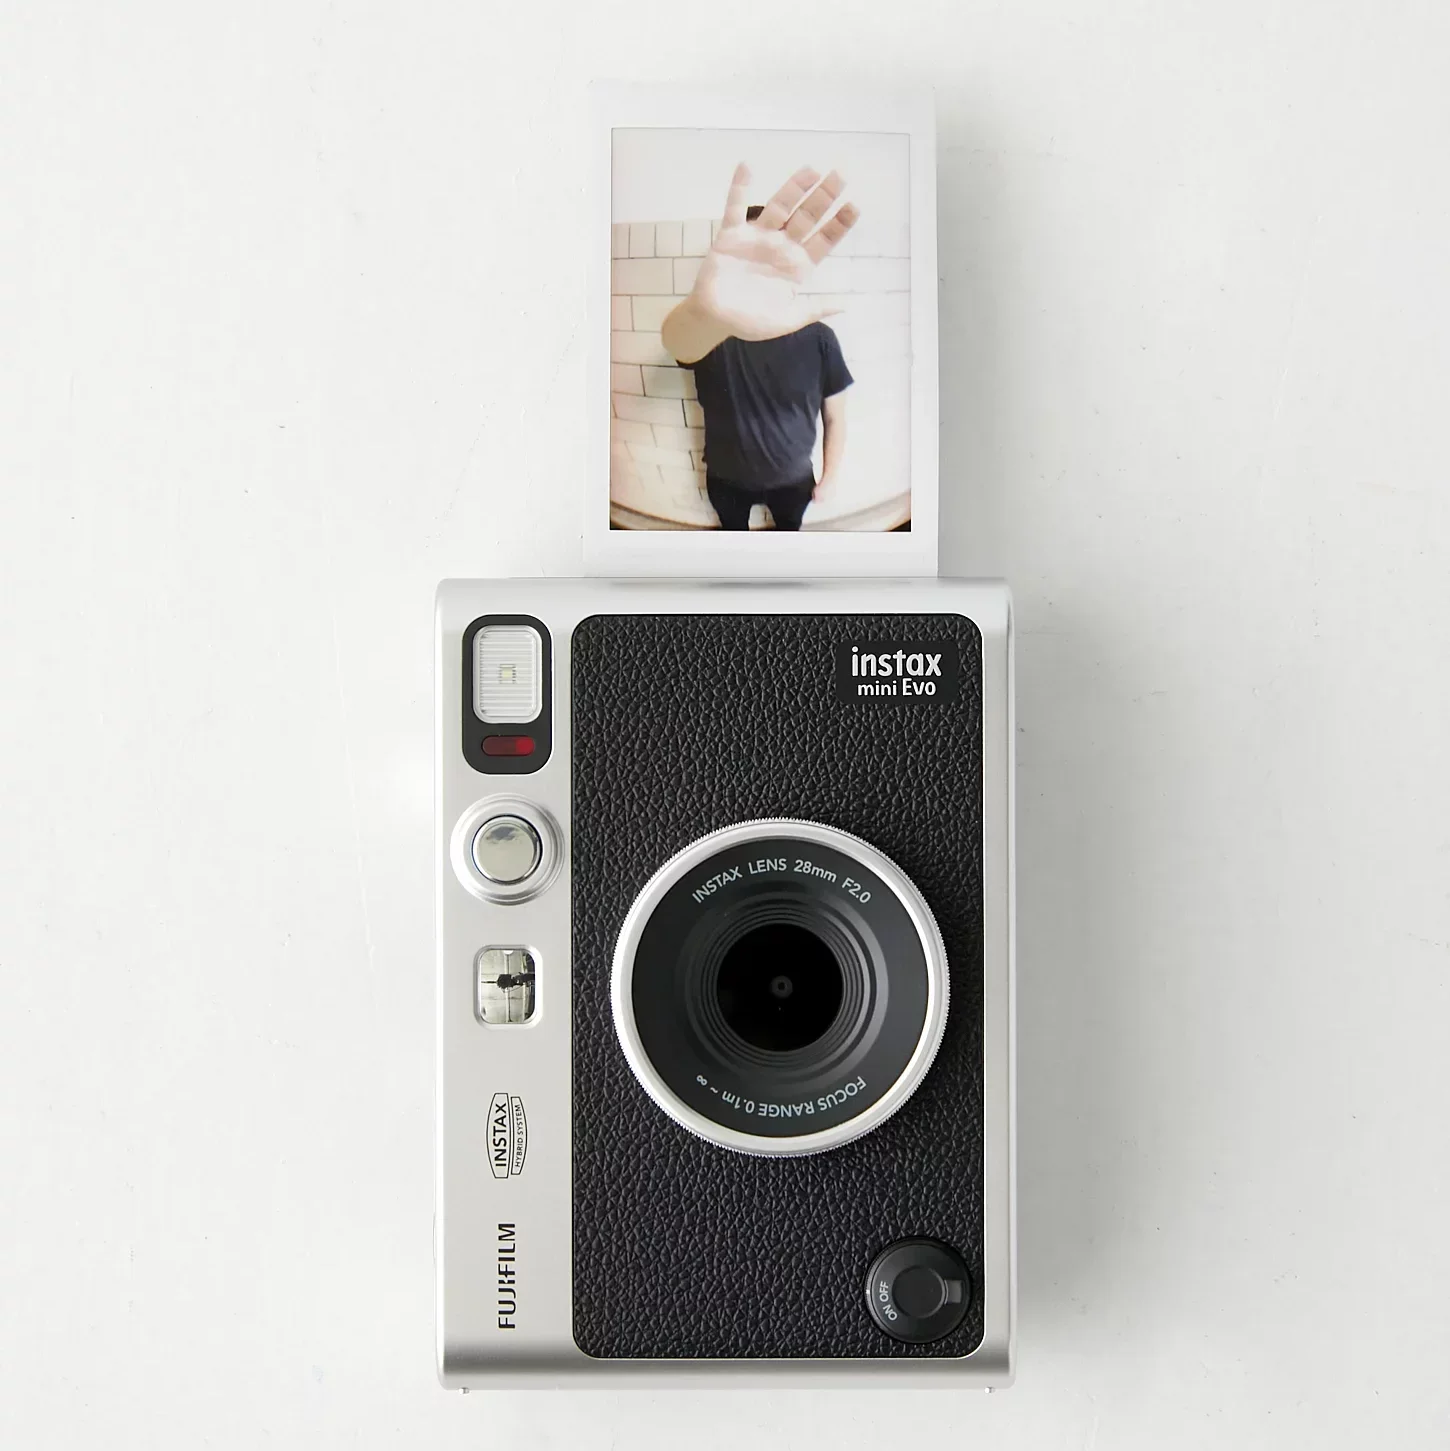 Instax Mini Evo Hybrid Instant Camera producing a poloroid against a white background.